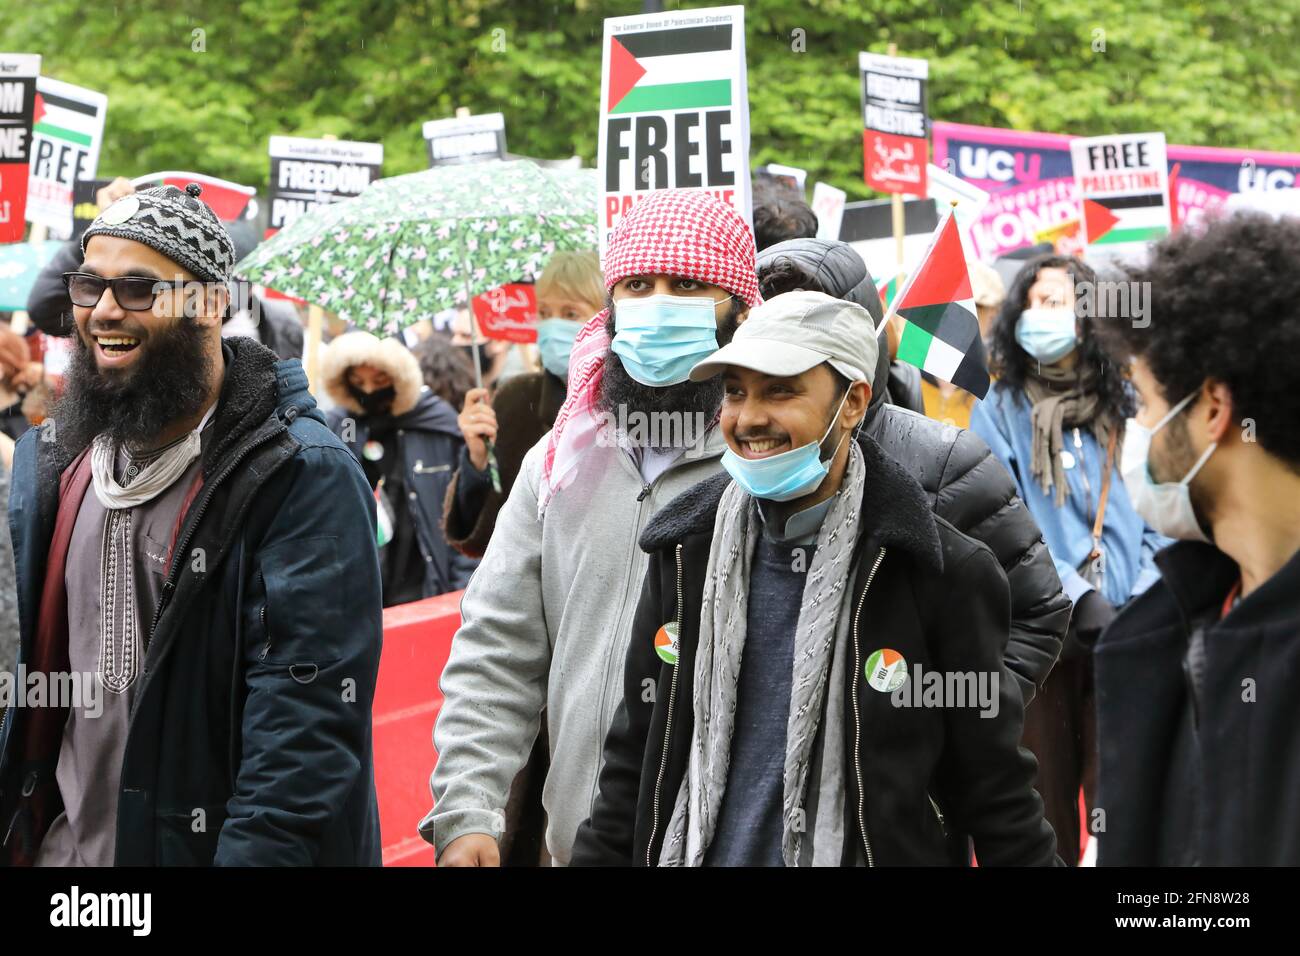 London, UK May 15th 2021. Thousands marched in Hyde Park today against the Gaza conflict, on Nakba commemoration day. Protesters from all backgrounds held placards demanding justice for Palestinians. Monica Wells/Alamy Live News Stock Photo